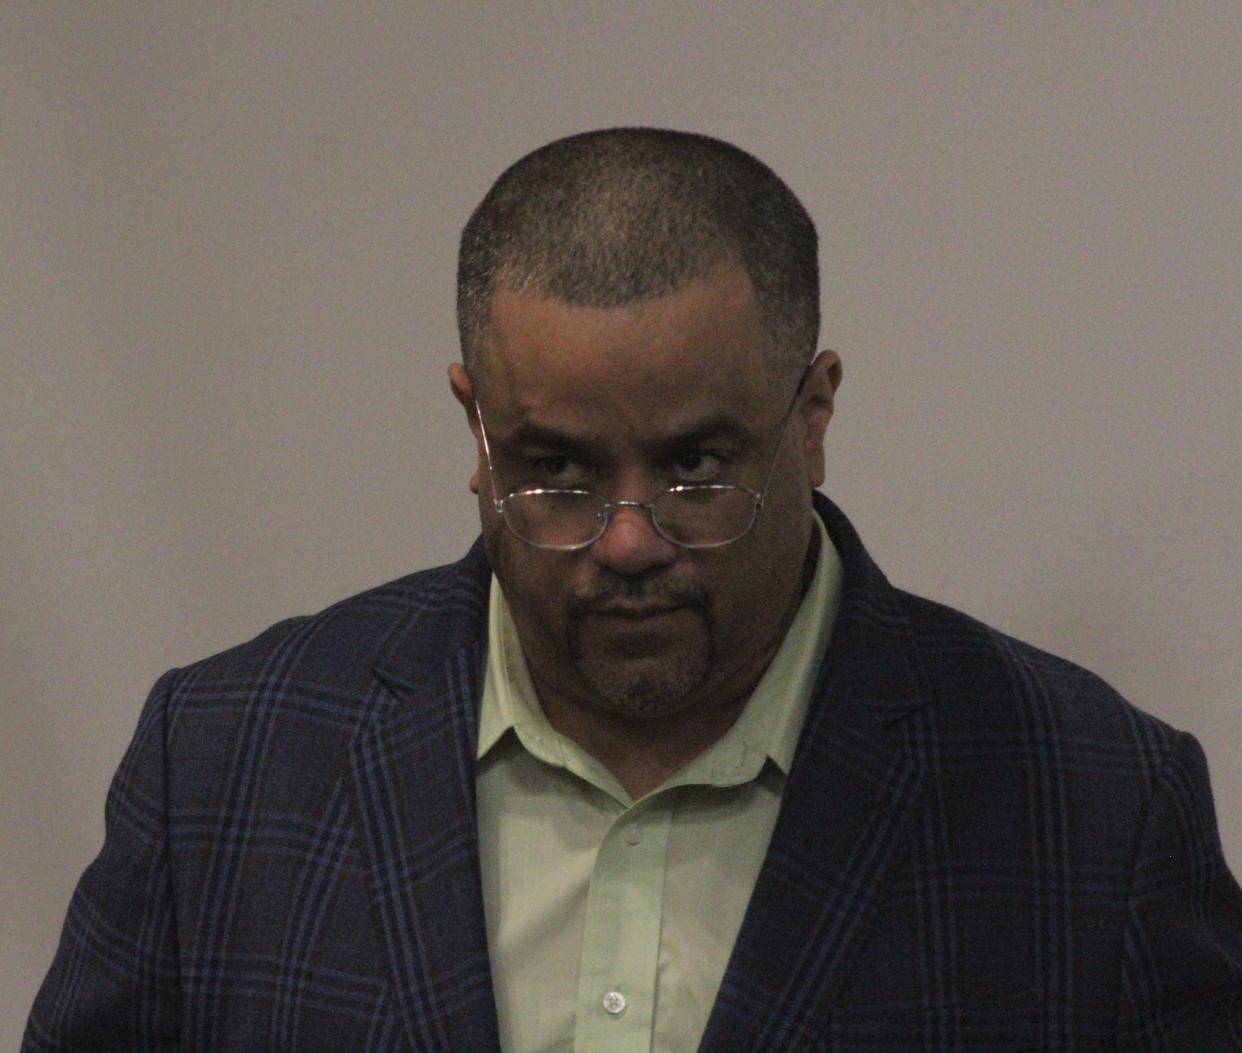 Julio C. Rivera, who is being held without bond, was led into court for the penalty phase of his trial, Tuesday, Jan. 16, 2024. Jurors will decide whether to recommend the death penalty for Rivera, who killed his childhood friend in 2019 in a storage unit in DeBary.